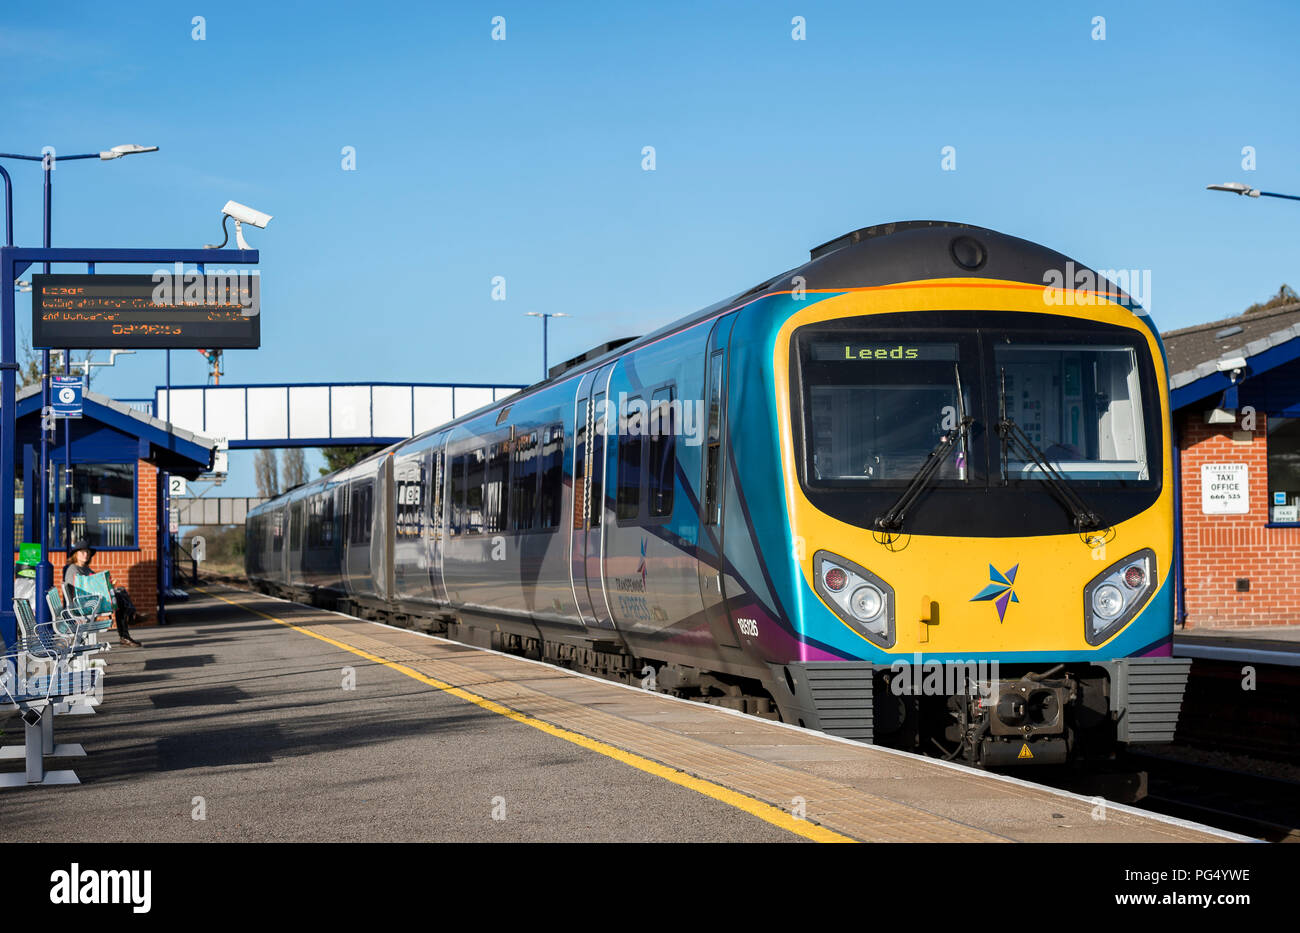 Transpennine Express Class 185 passenger train waiting at a platform at a railway station on it’s way to Leeds. Stock Photo